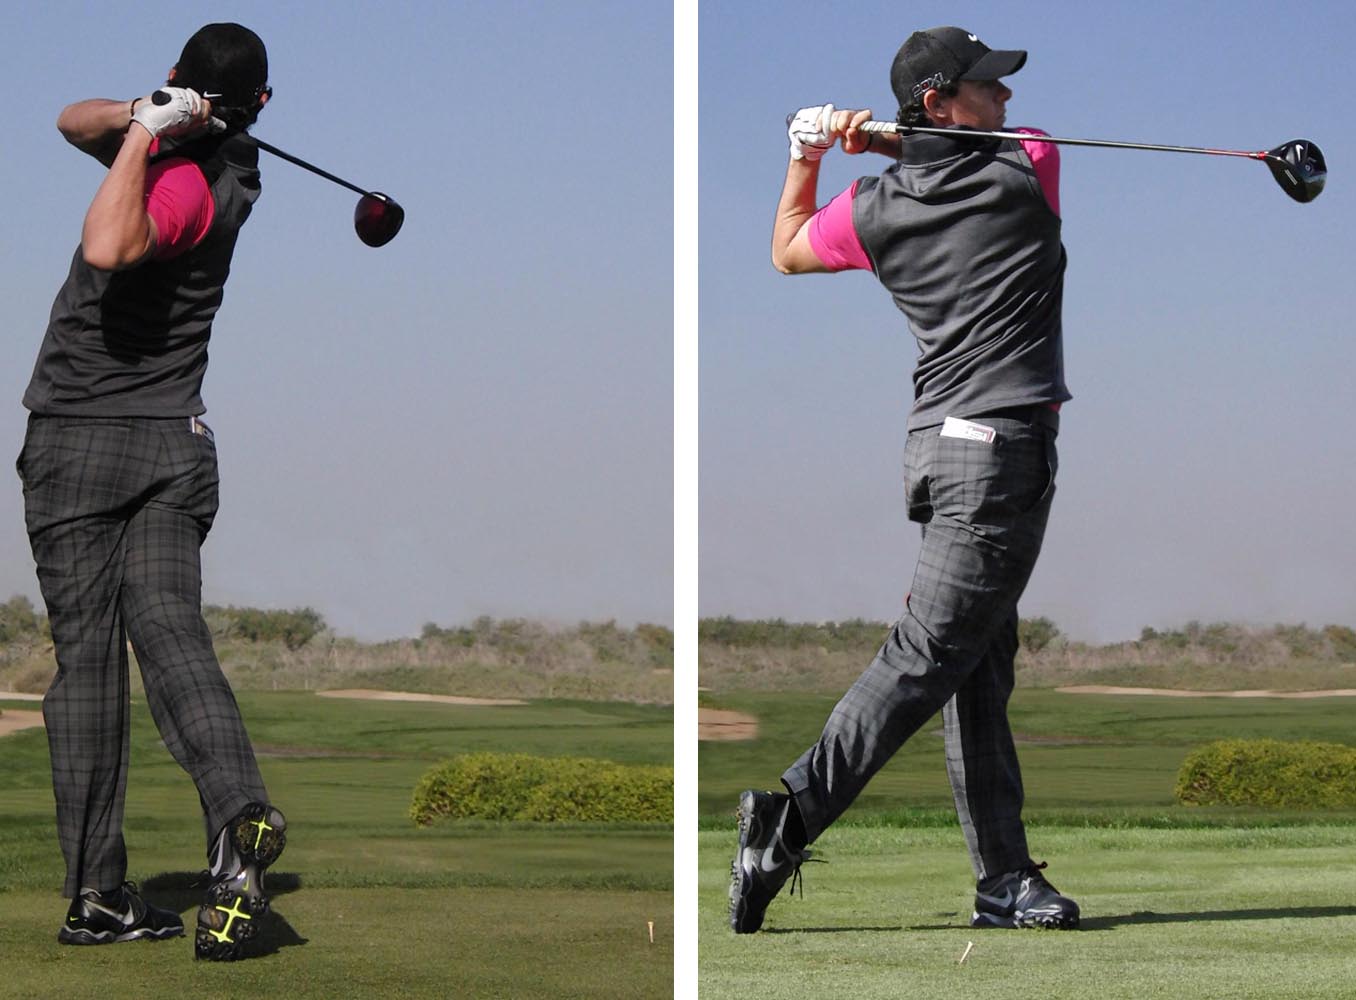 McIlroy has always had a stable and balan ced finish whick is key to a consistent swing